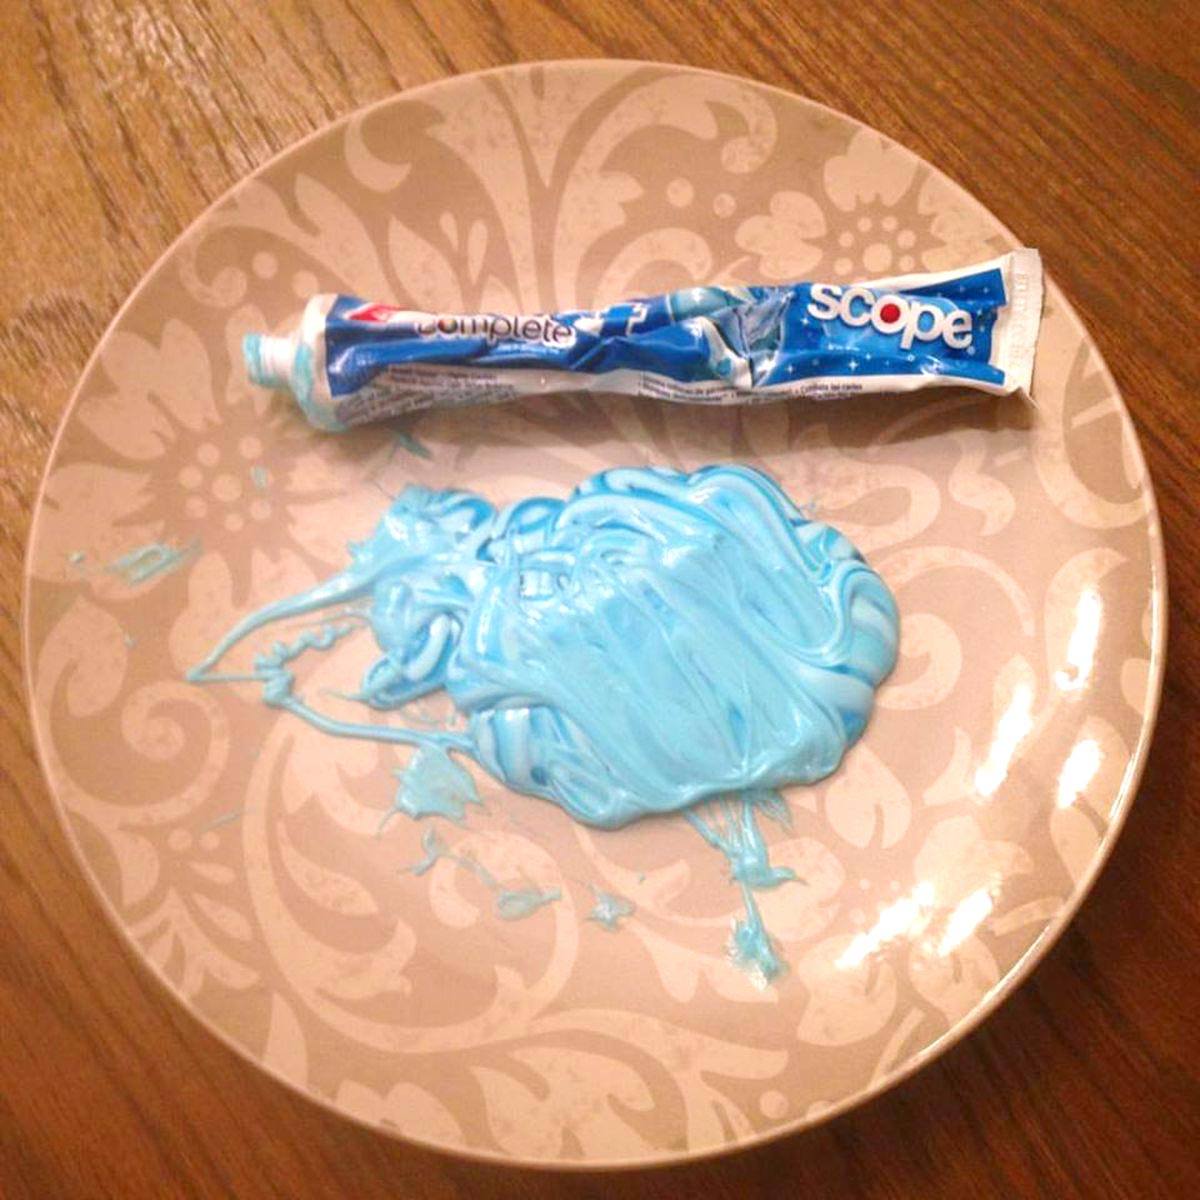 Mom Makes Daughter Squirt Toothpaste on a Plate for a Powerful Life Lesson